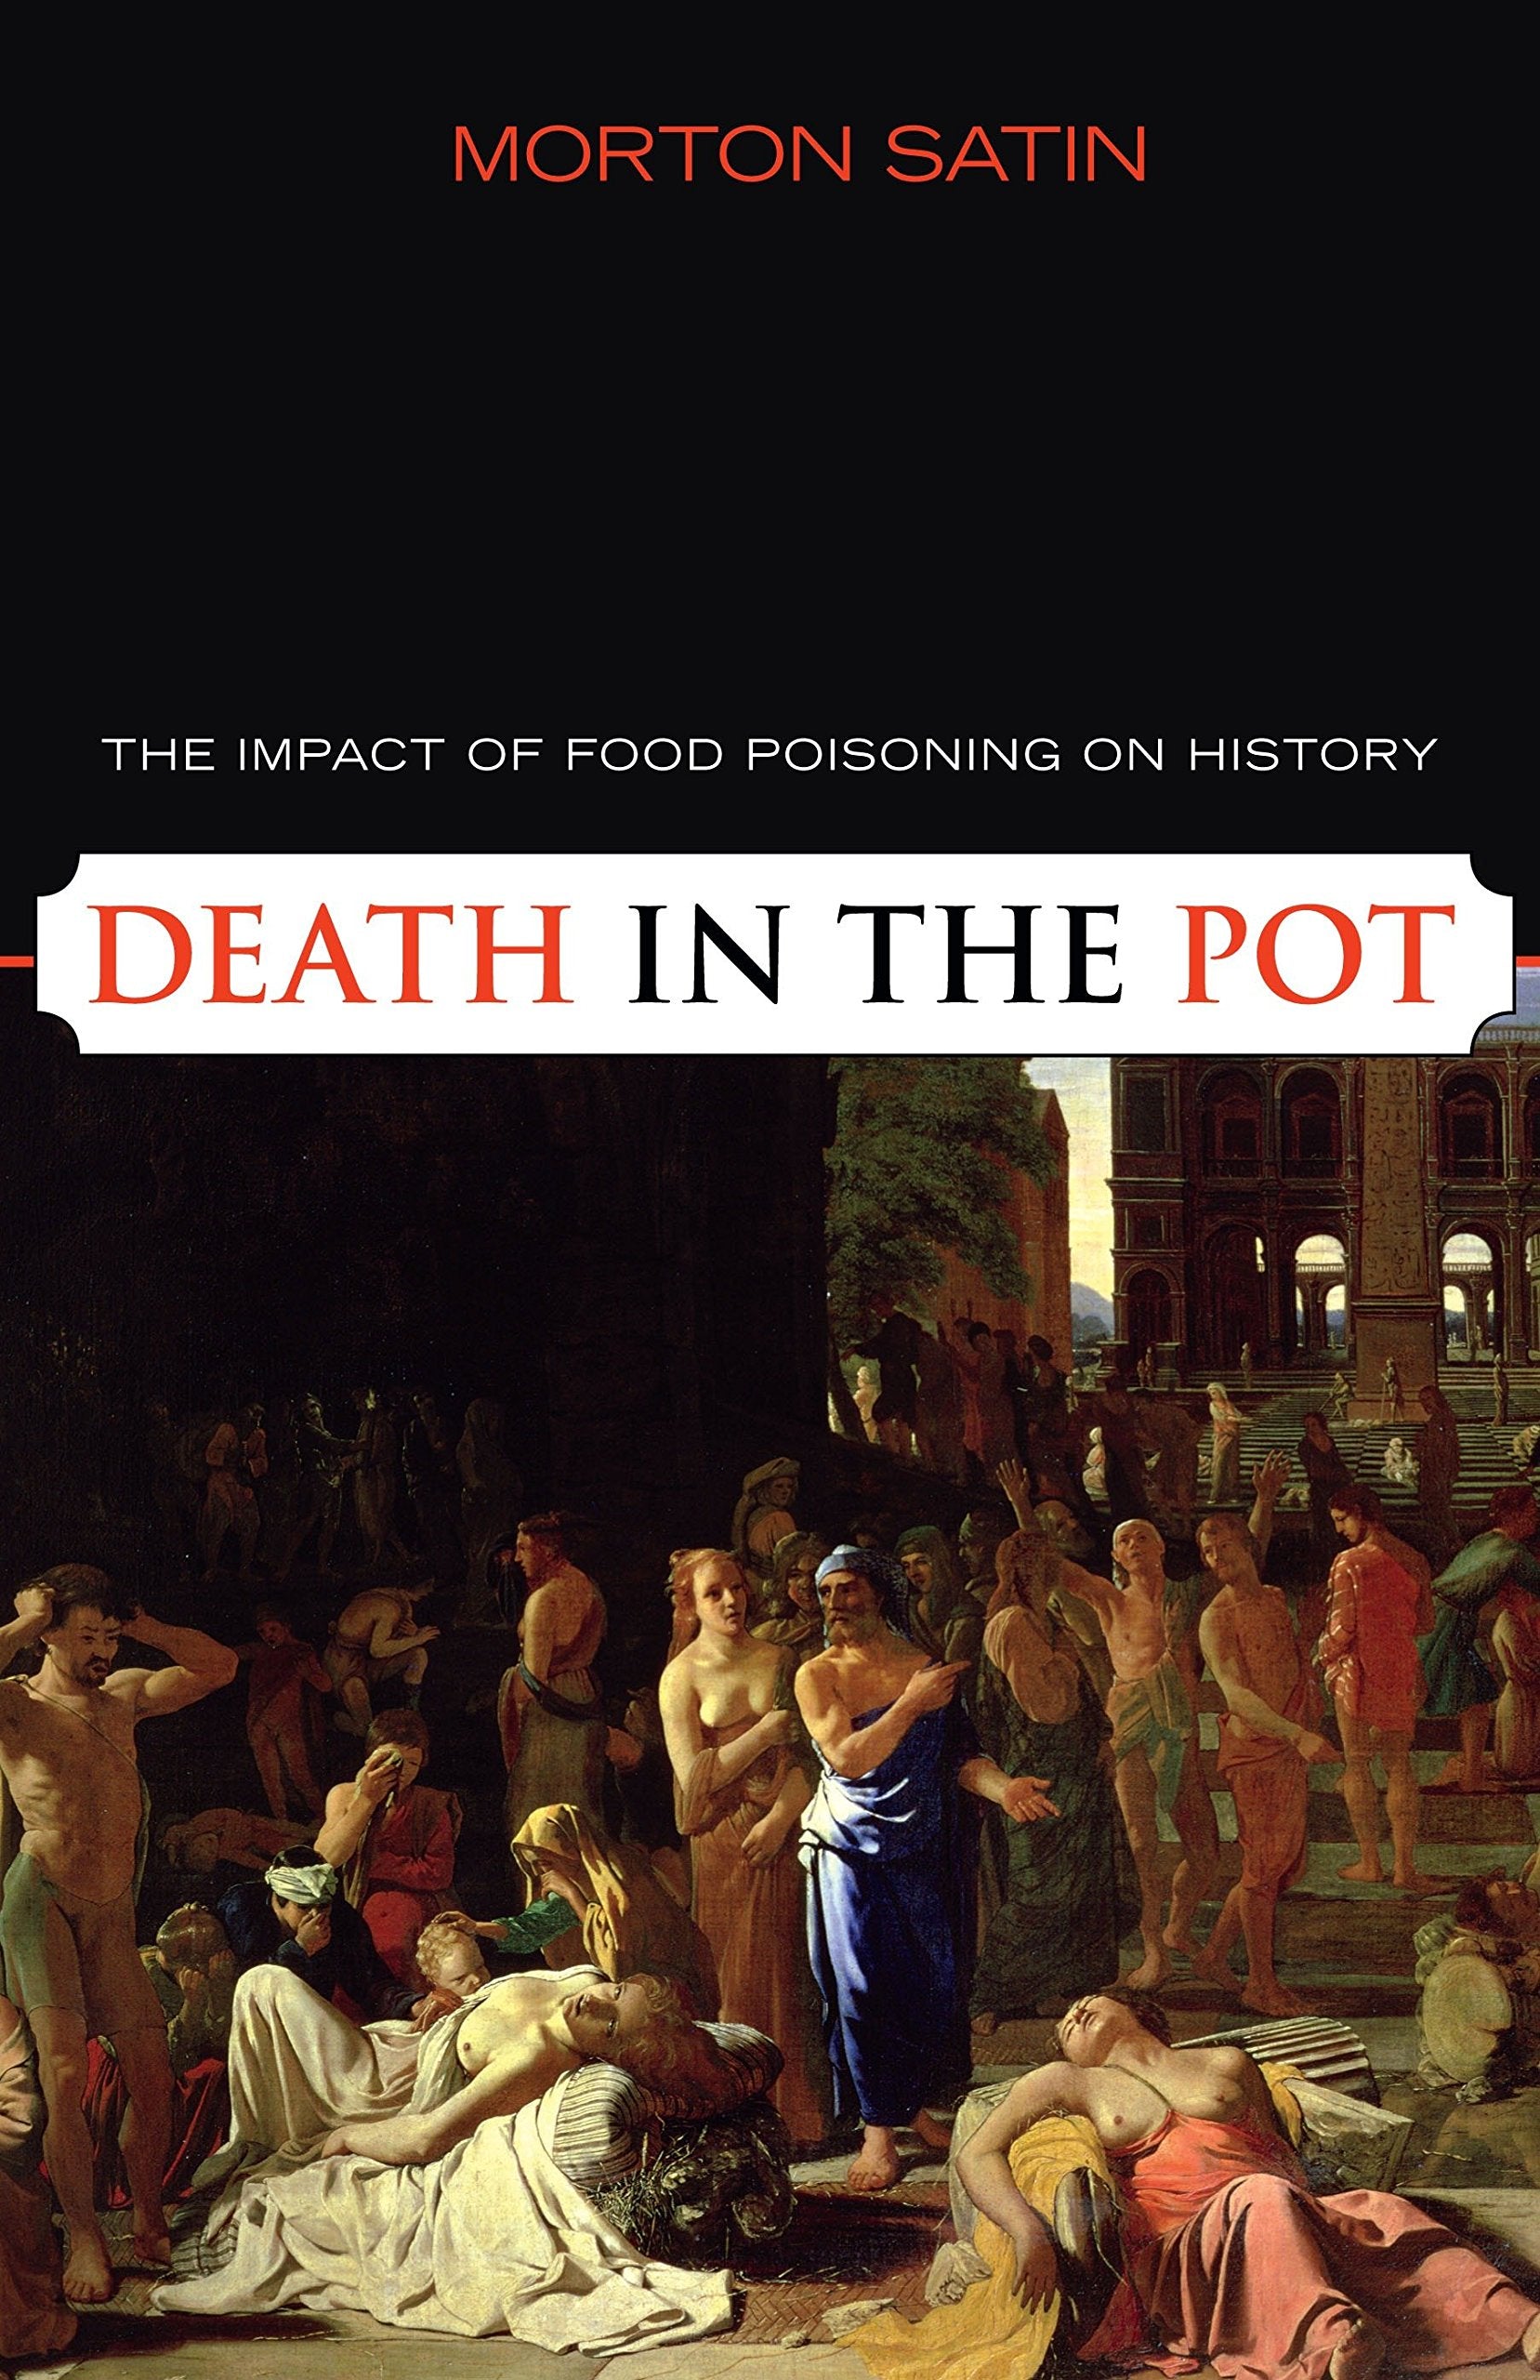 Death in the Pot: The Impact of Food Poisoning on History (Morton Satin)